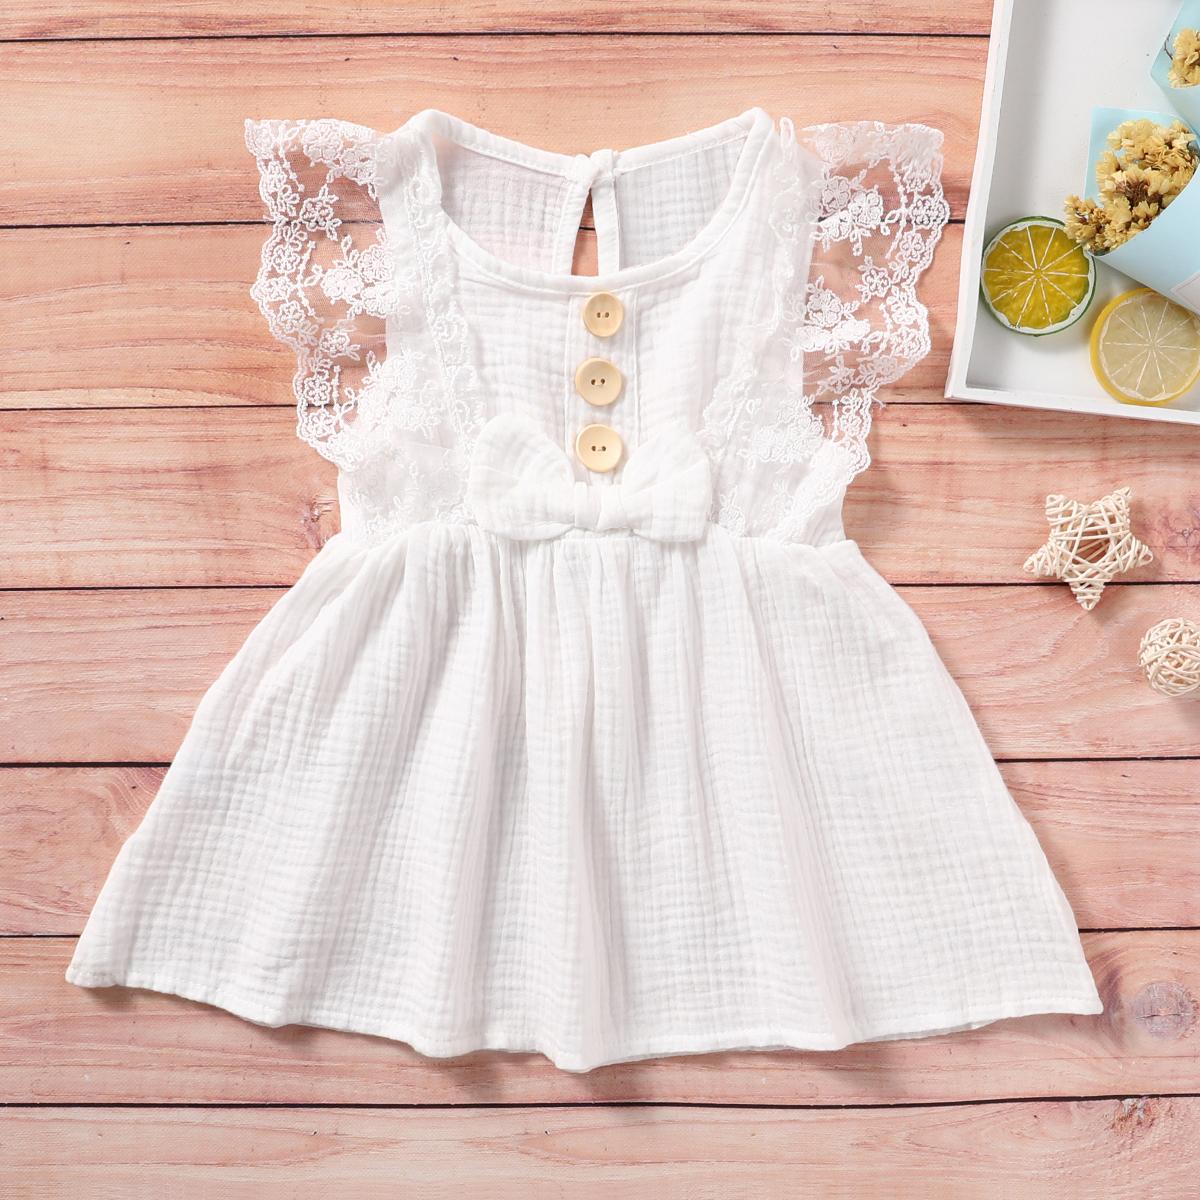 Baby Girl 95% Cotton Crepe Sleeveless Lace Bowknot Button Dress